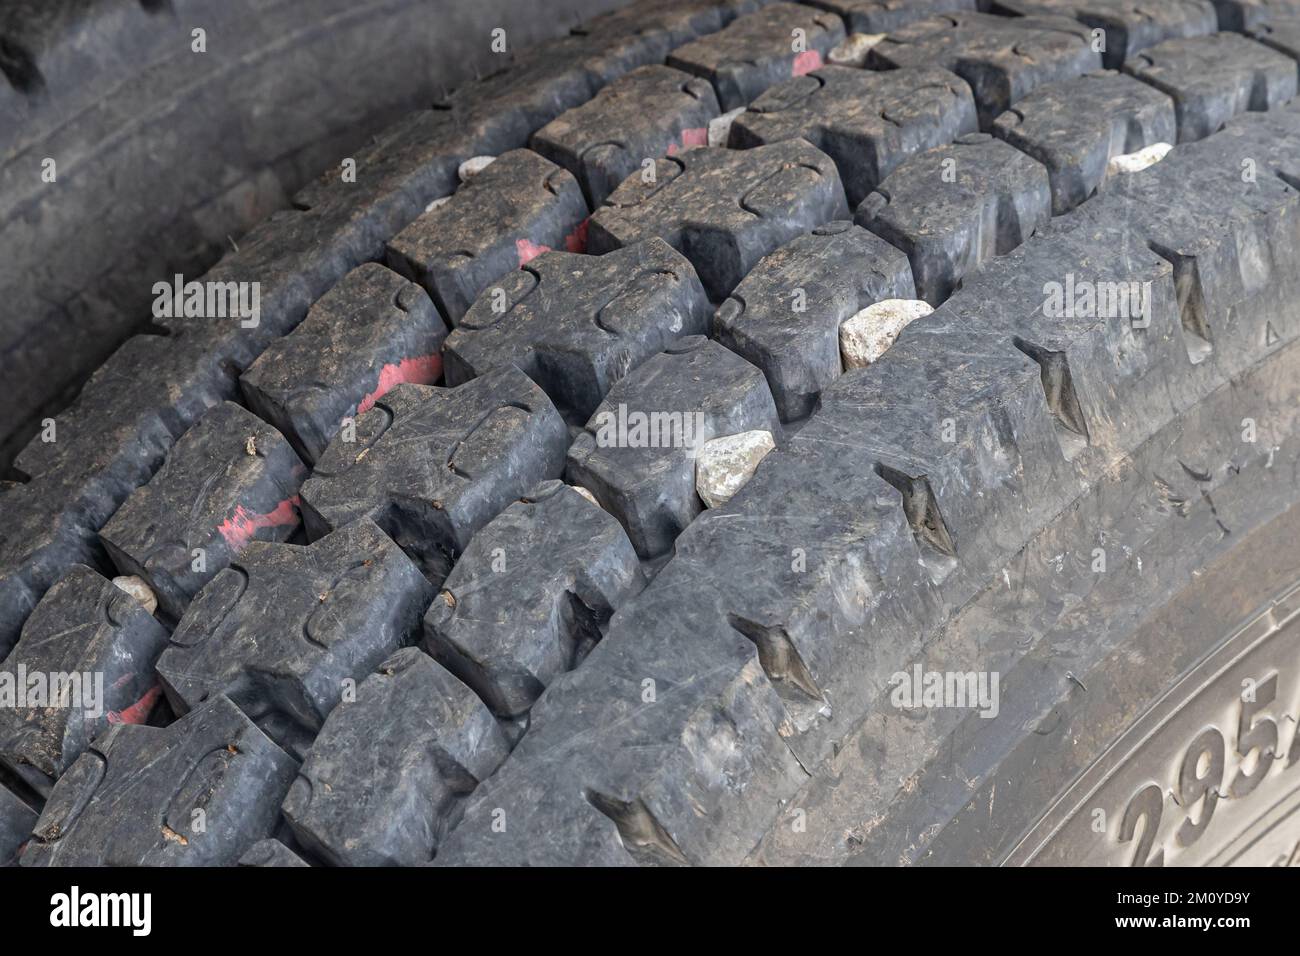 Tire tread on heavy duty grain truck tires. Treadwear, tire inspection, maintenance and safety concept. Stock Photo